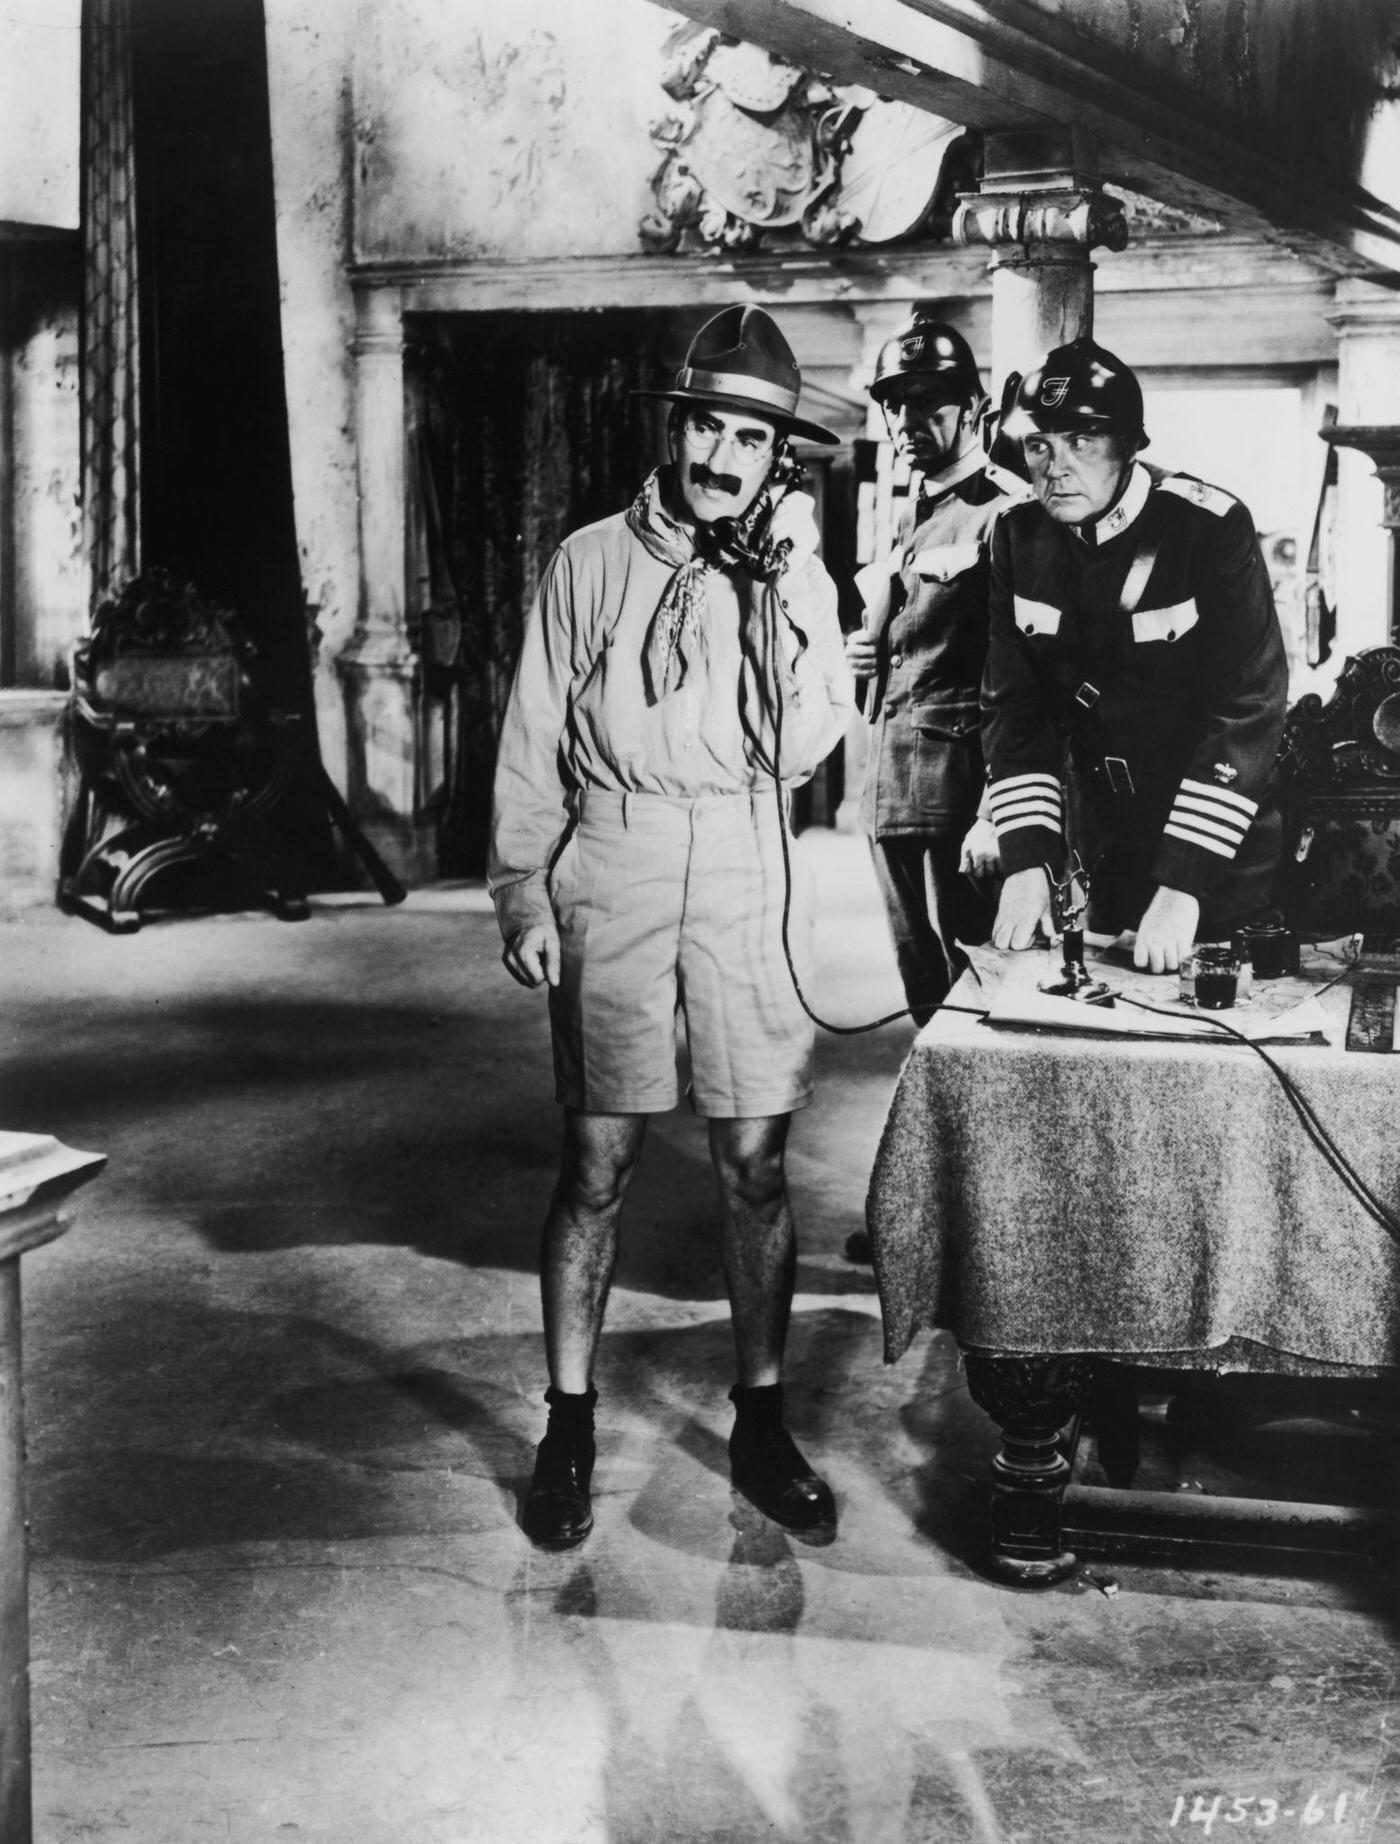 Groucho Marx shines as Rufus T. Firefly in Duck Soup (1933).